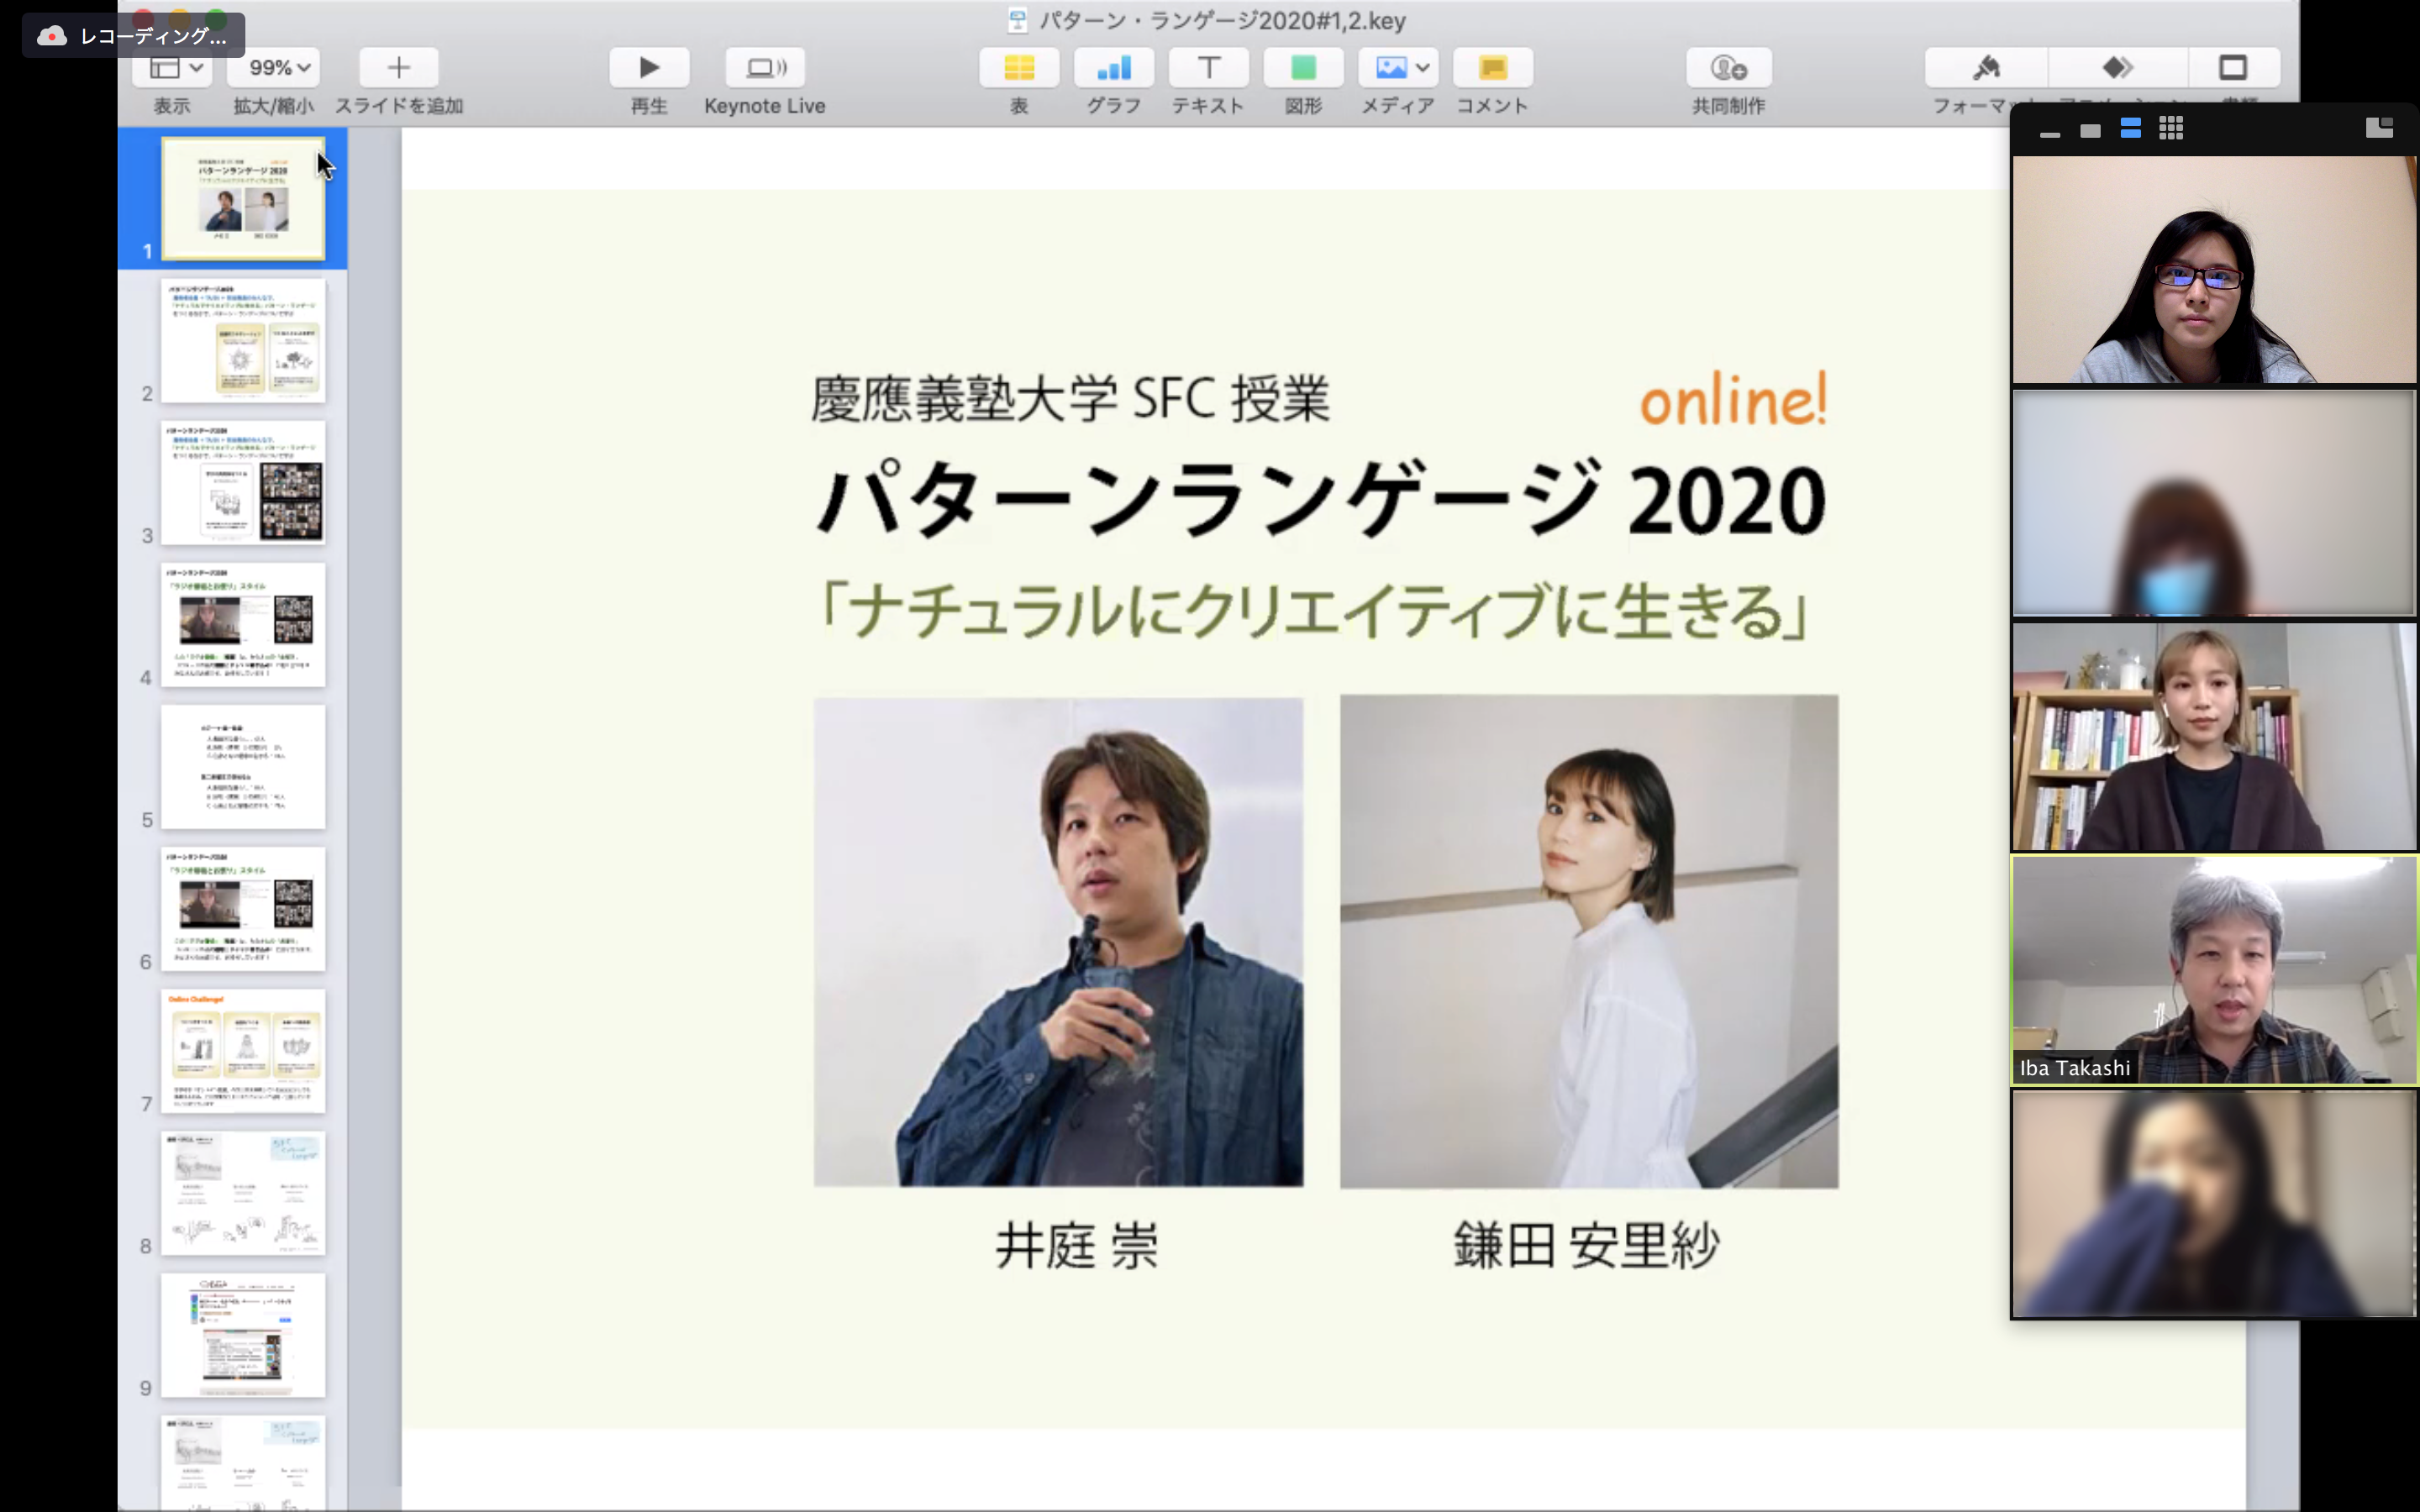 https://www.sfc.keio.ac.jp/images/2020s_goodpractice_iba_t1.png